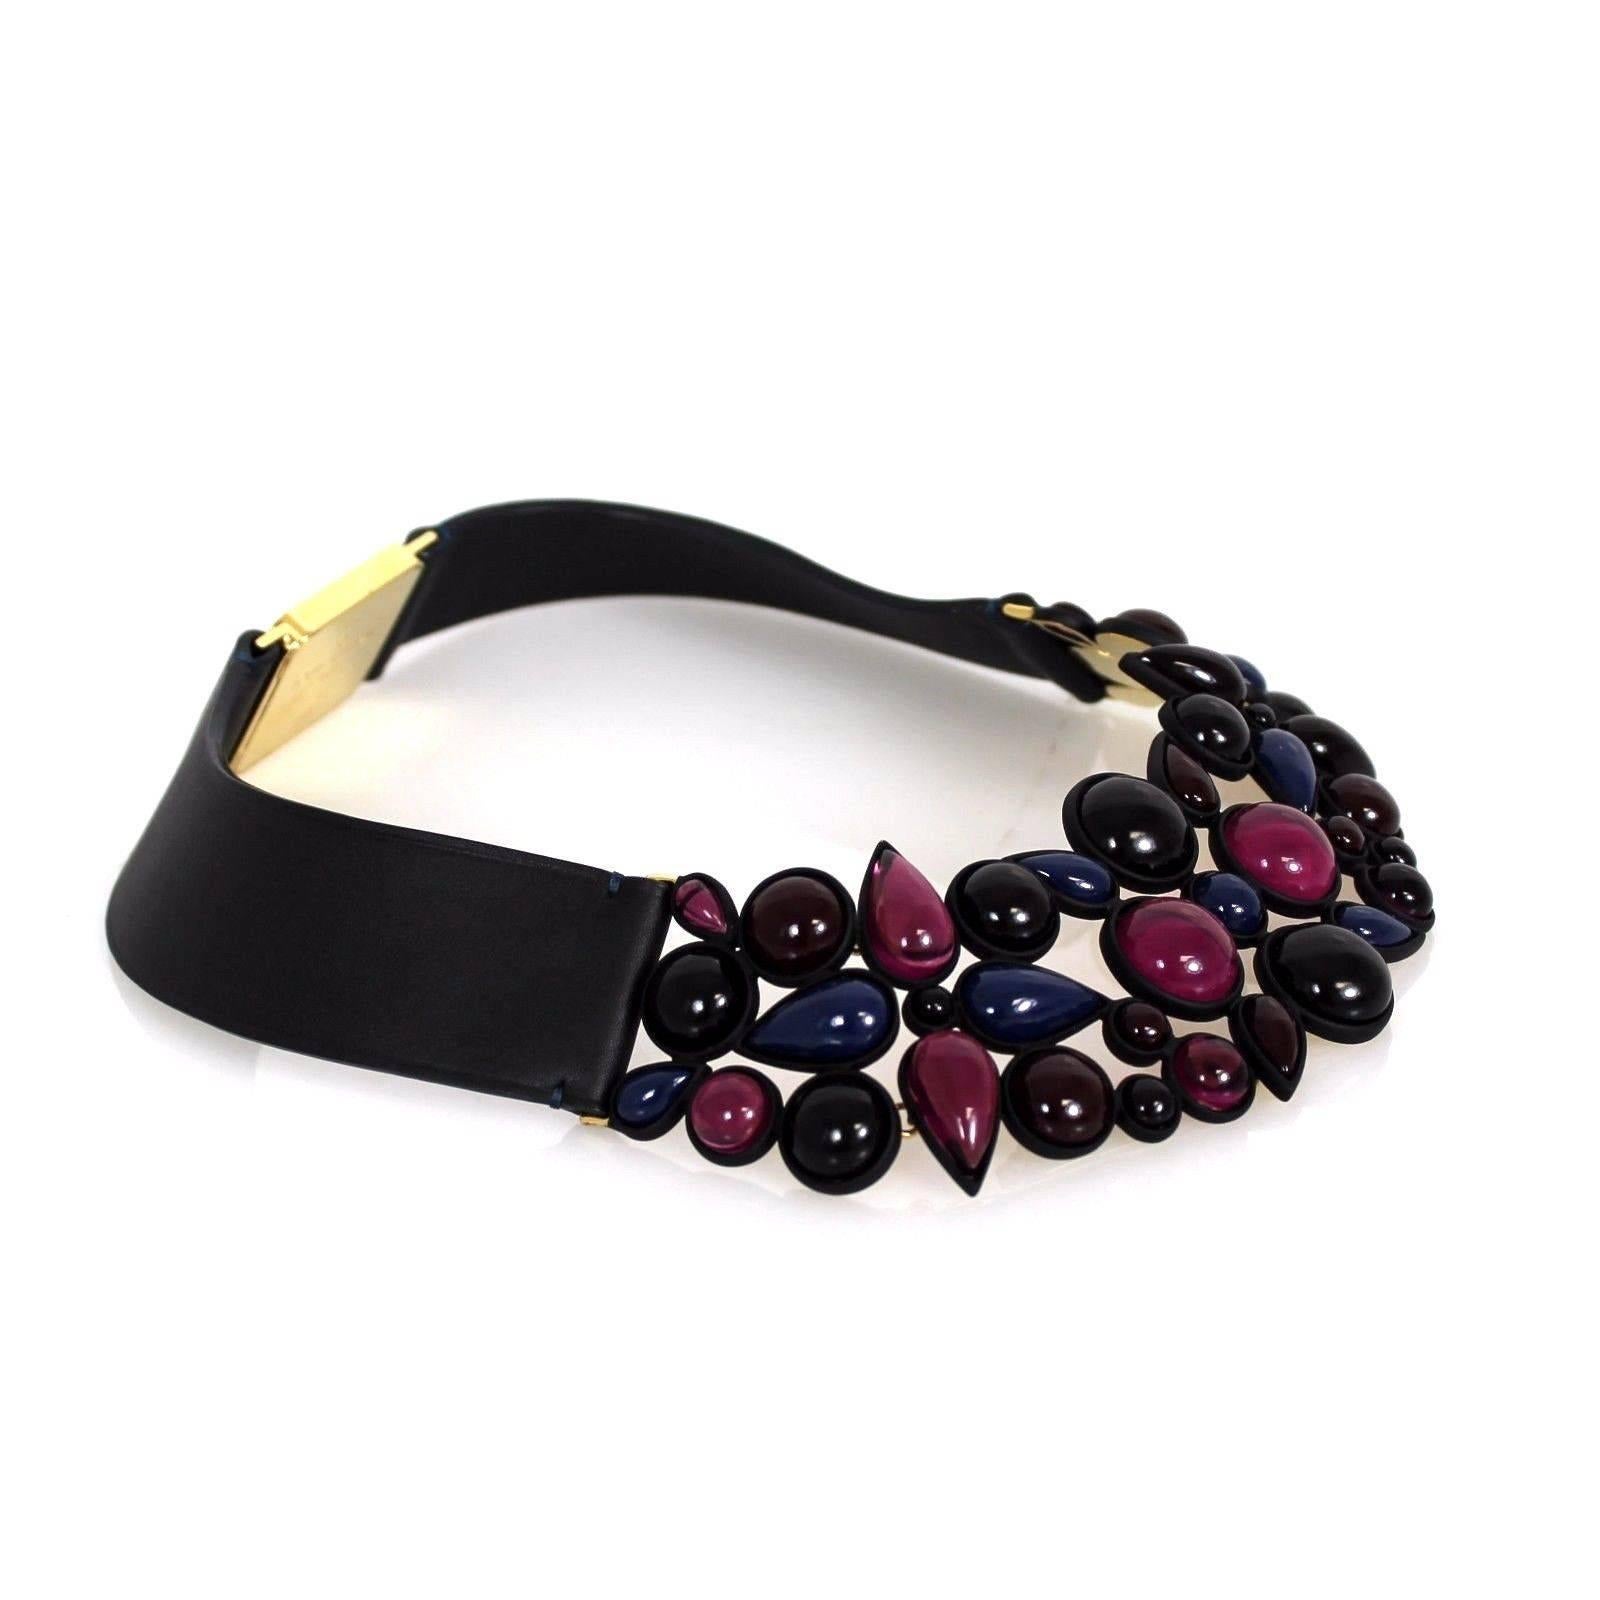 Louis Vuitton bold collar necklace. Thick to make a statement and take any ordinary outfit and turn completely pieced together. Features: Various size and shapes of shades of purple, indigo, and the deepest of plums, Gold hdw, a click closure on the